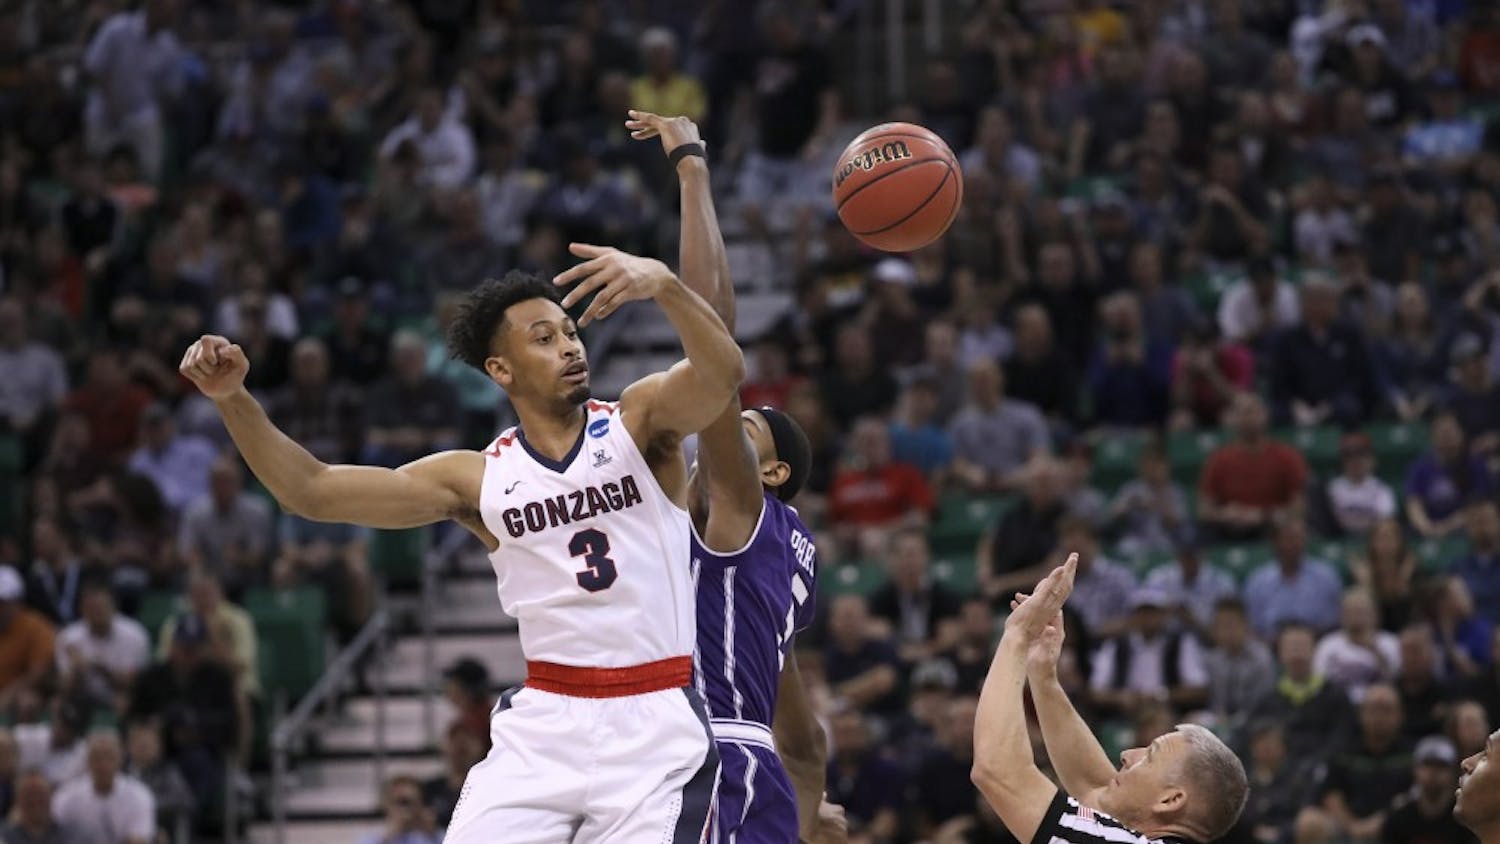 Gonzaga's Johnathan Williams (3) gets the tip-off over Northwestern's Dererk Pardon during the first half in the second round of the NCAA Tournament at Vivint Smart Home Arena in Salt Lake City on Saturday, March 18, 2017. Gonzaga advanced, 79-73. (Armando L. Sanchez/Chicago Tribune/TNS)